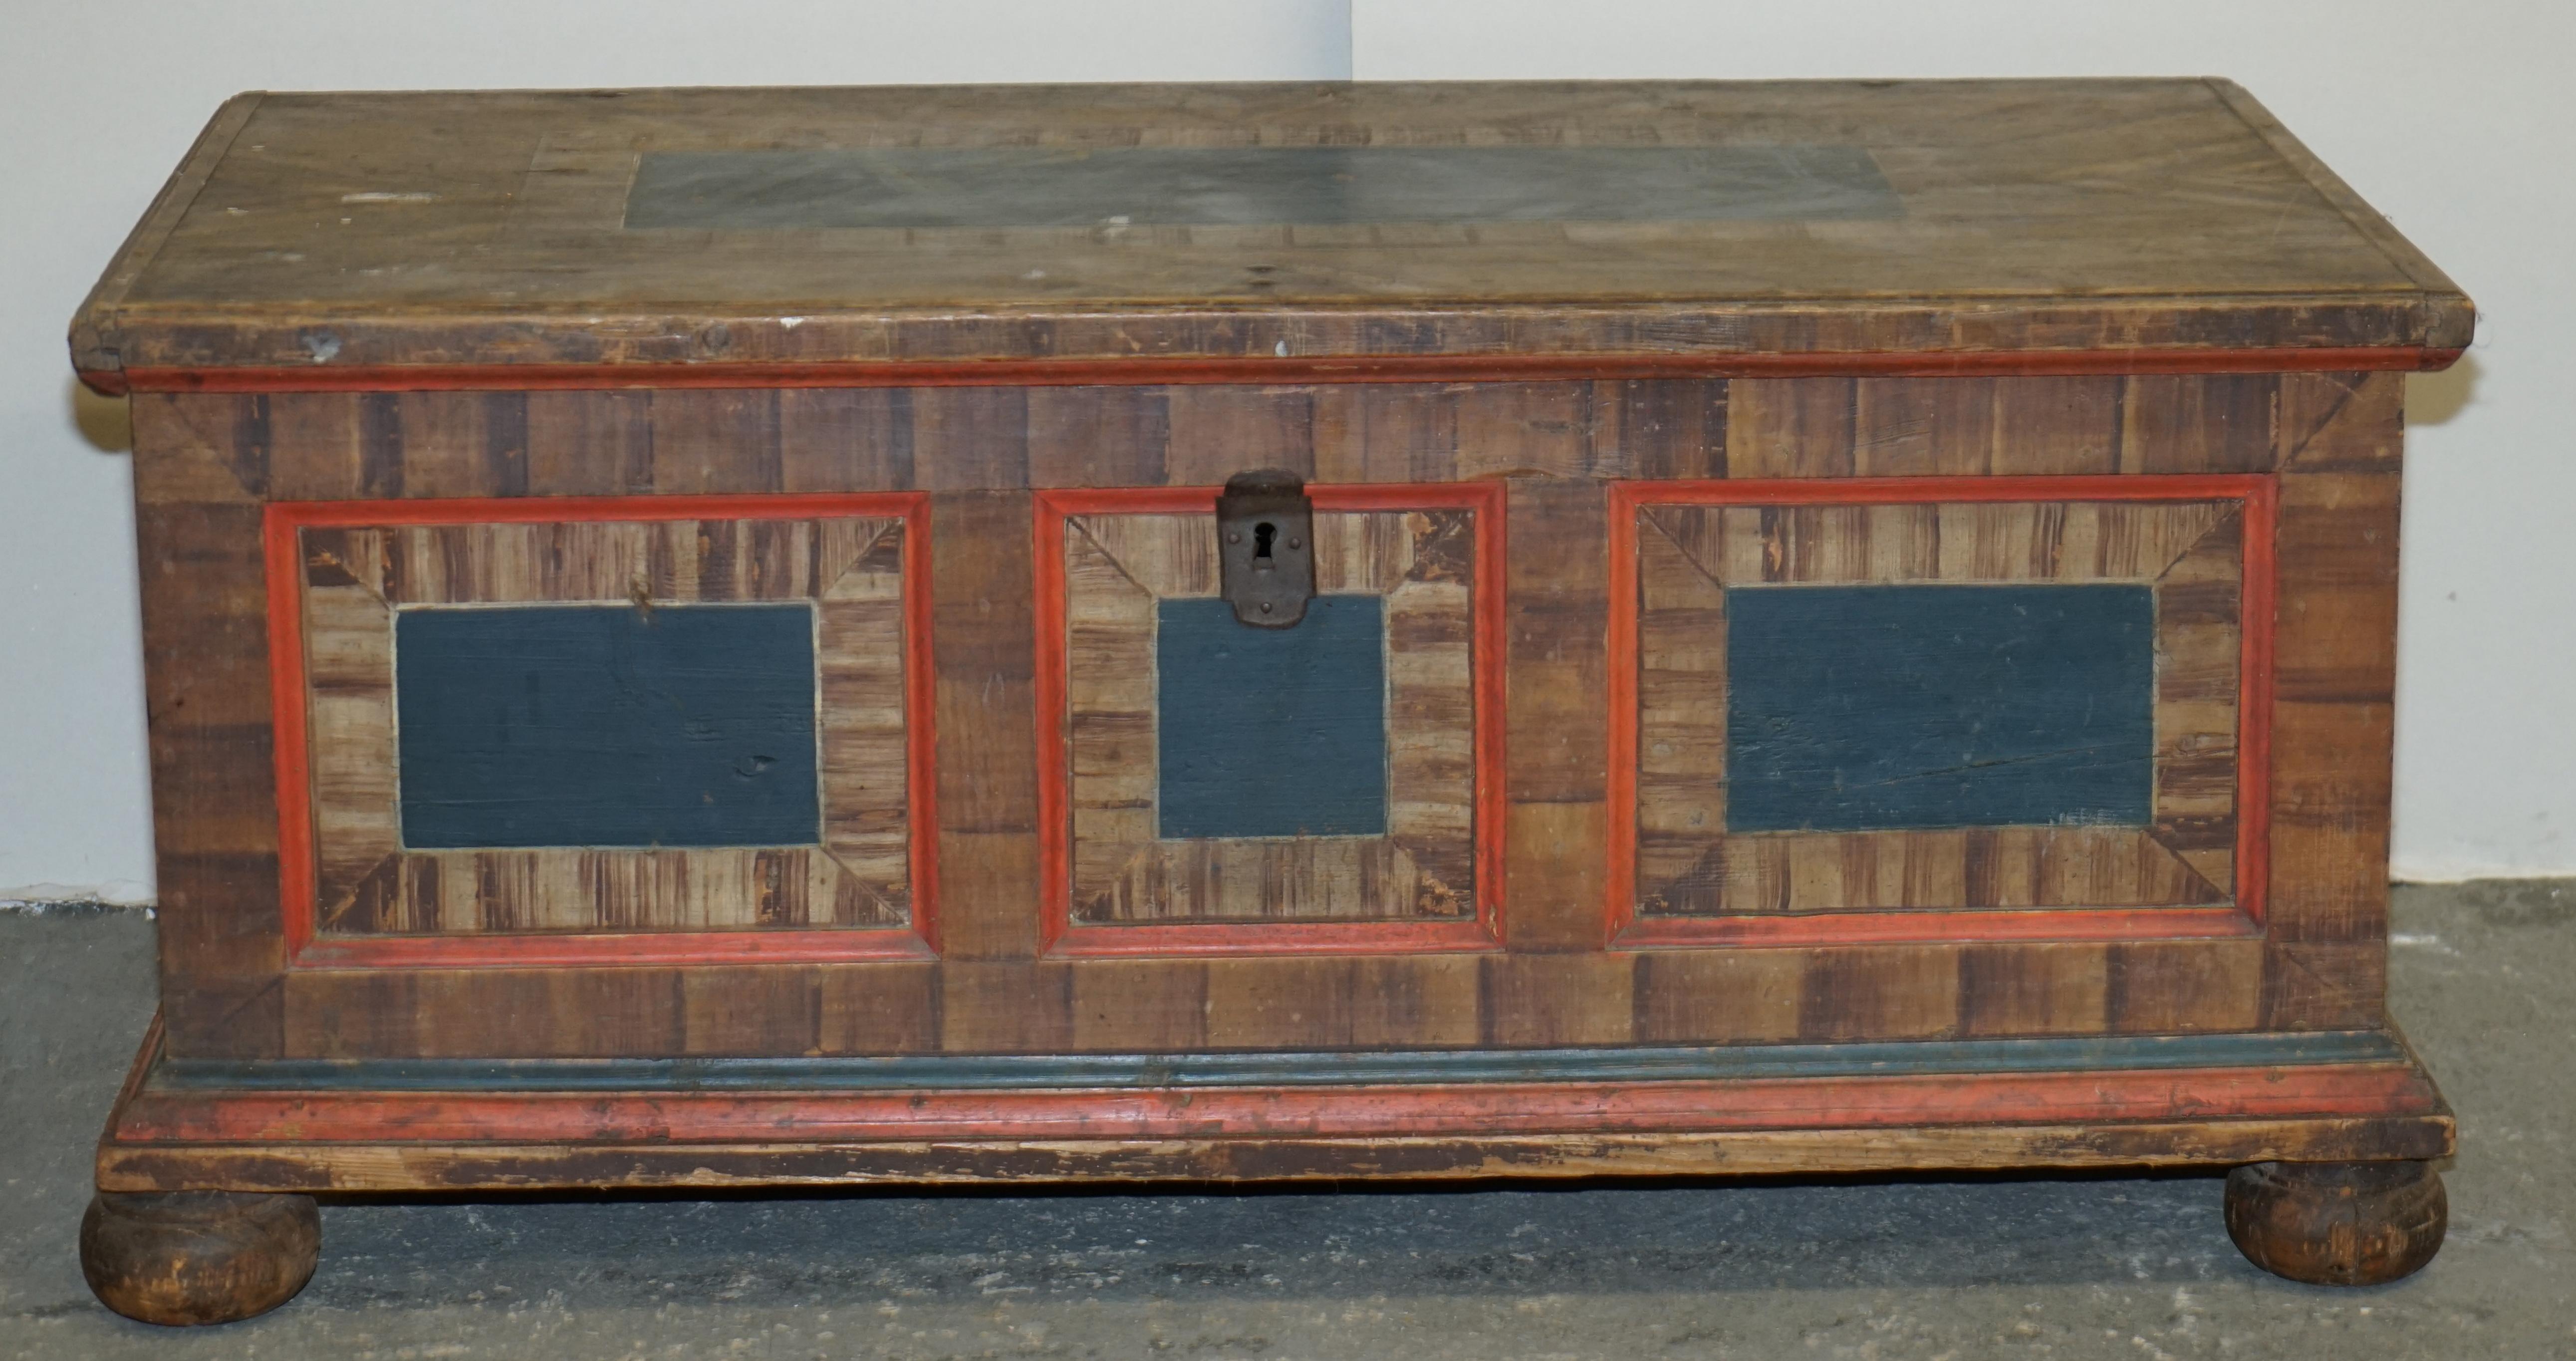 We are delighted to offer for sale this stunning, extra large circa 1800 hand painted European clothes trunk or marriage coffer chest with Acanthus leaf painting.

I have recently purchased a very large collection of these original, antique